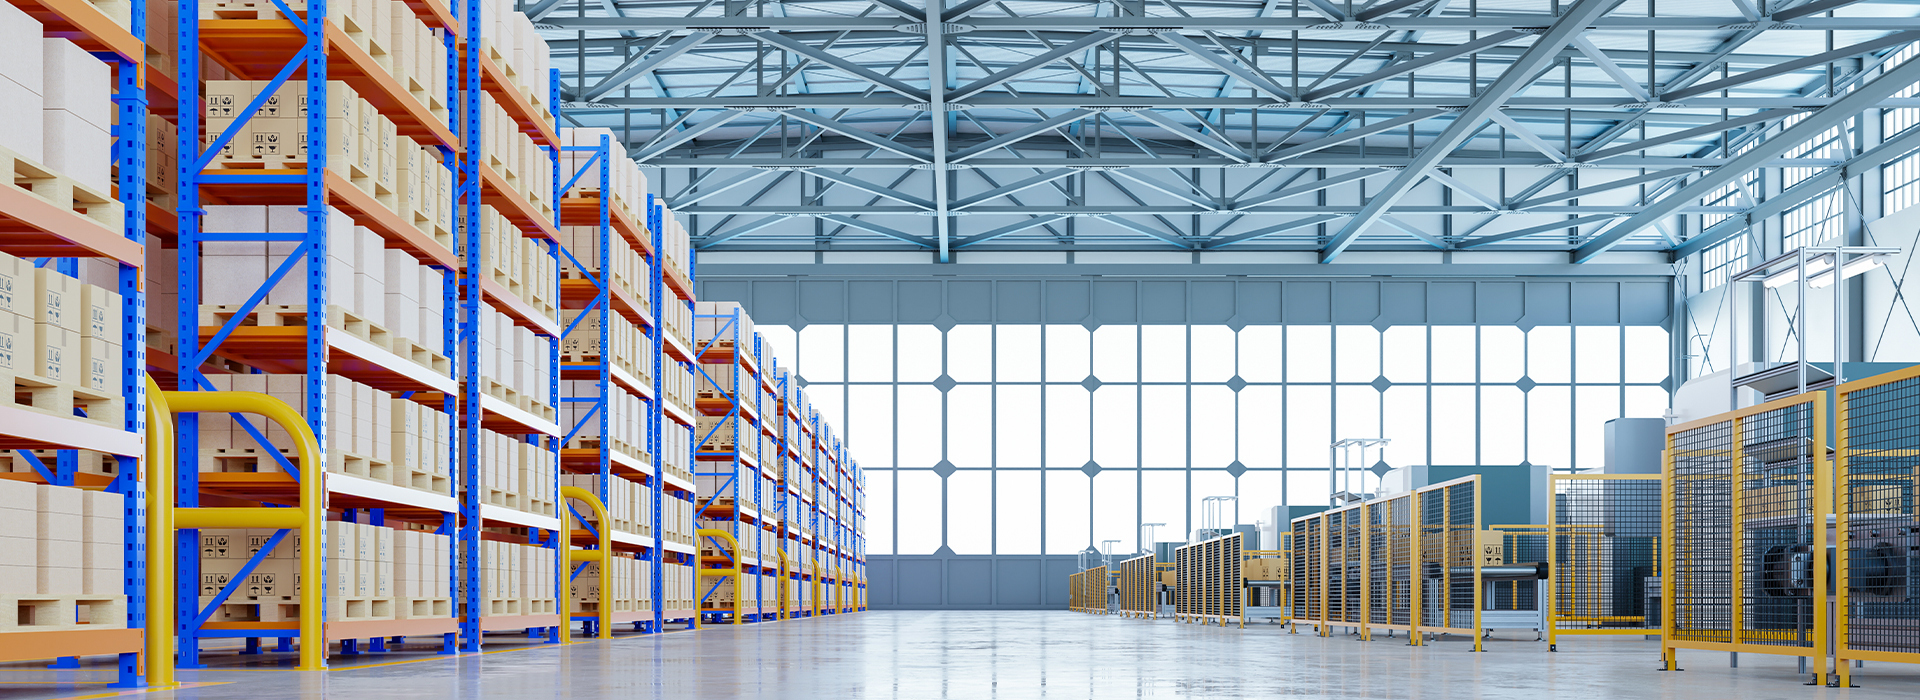 Benefits of Partnering with a Cleaning Company for Distribution Warehouse Facilities